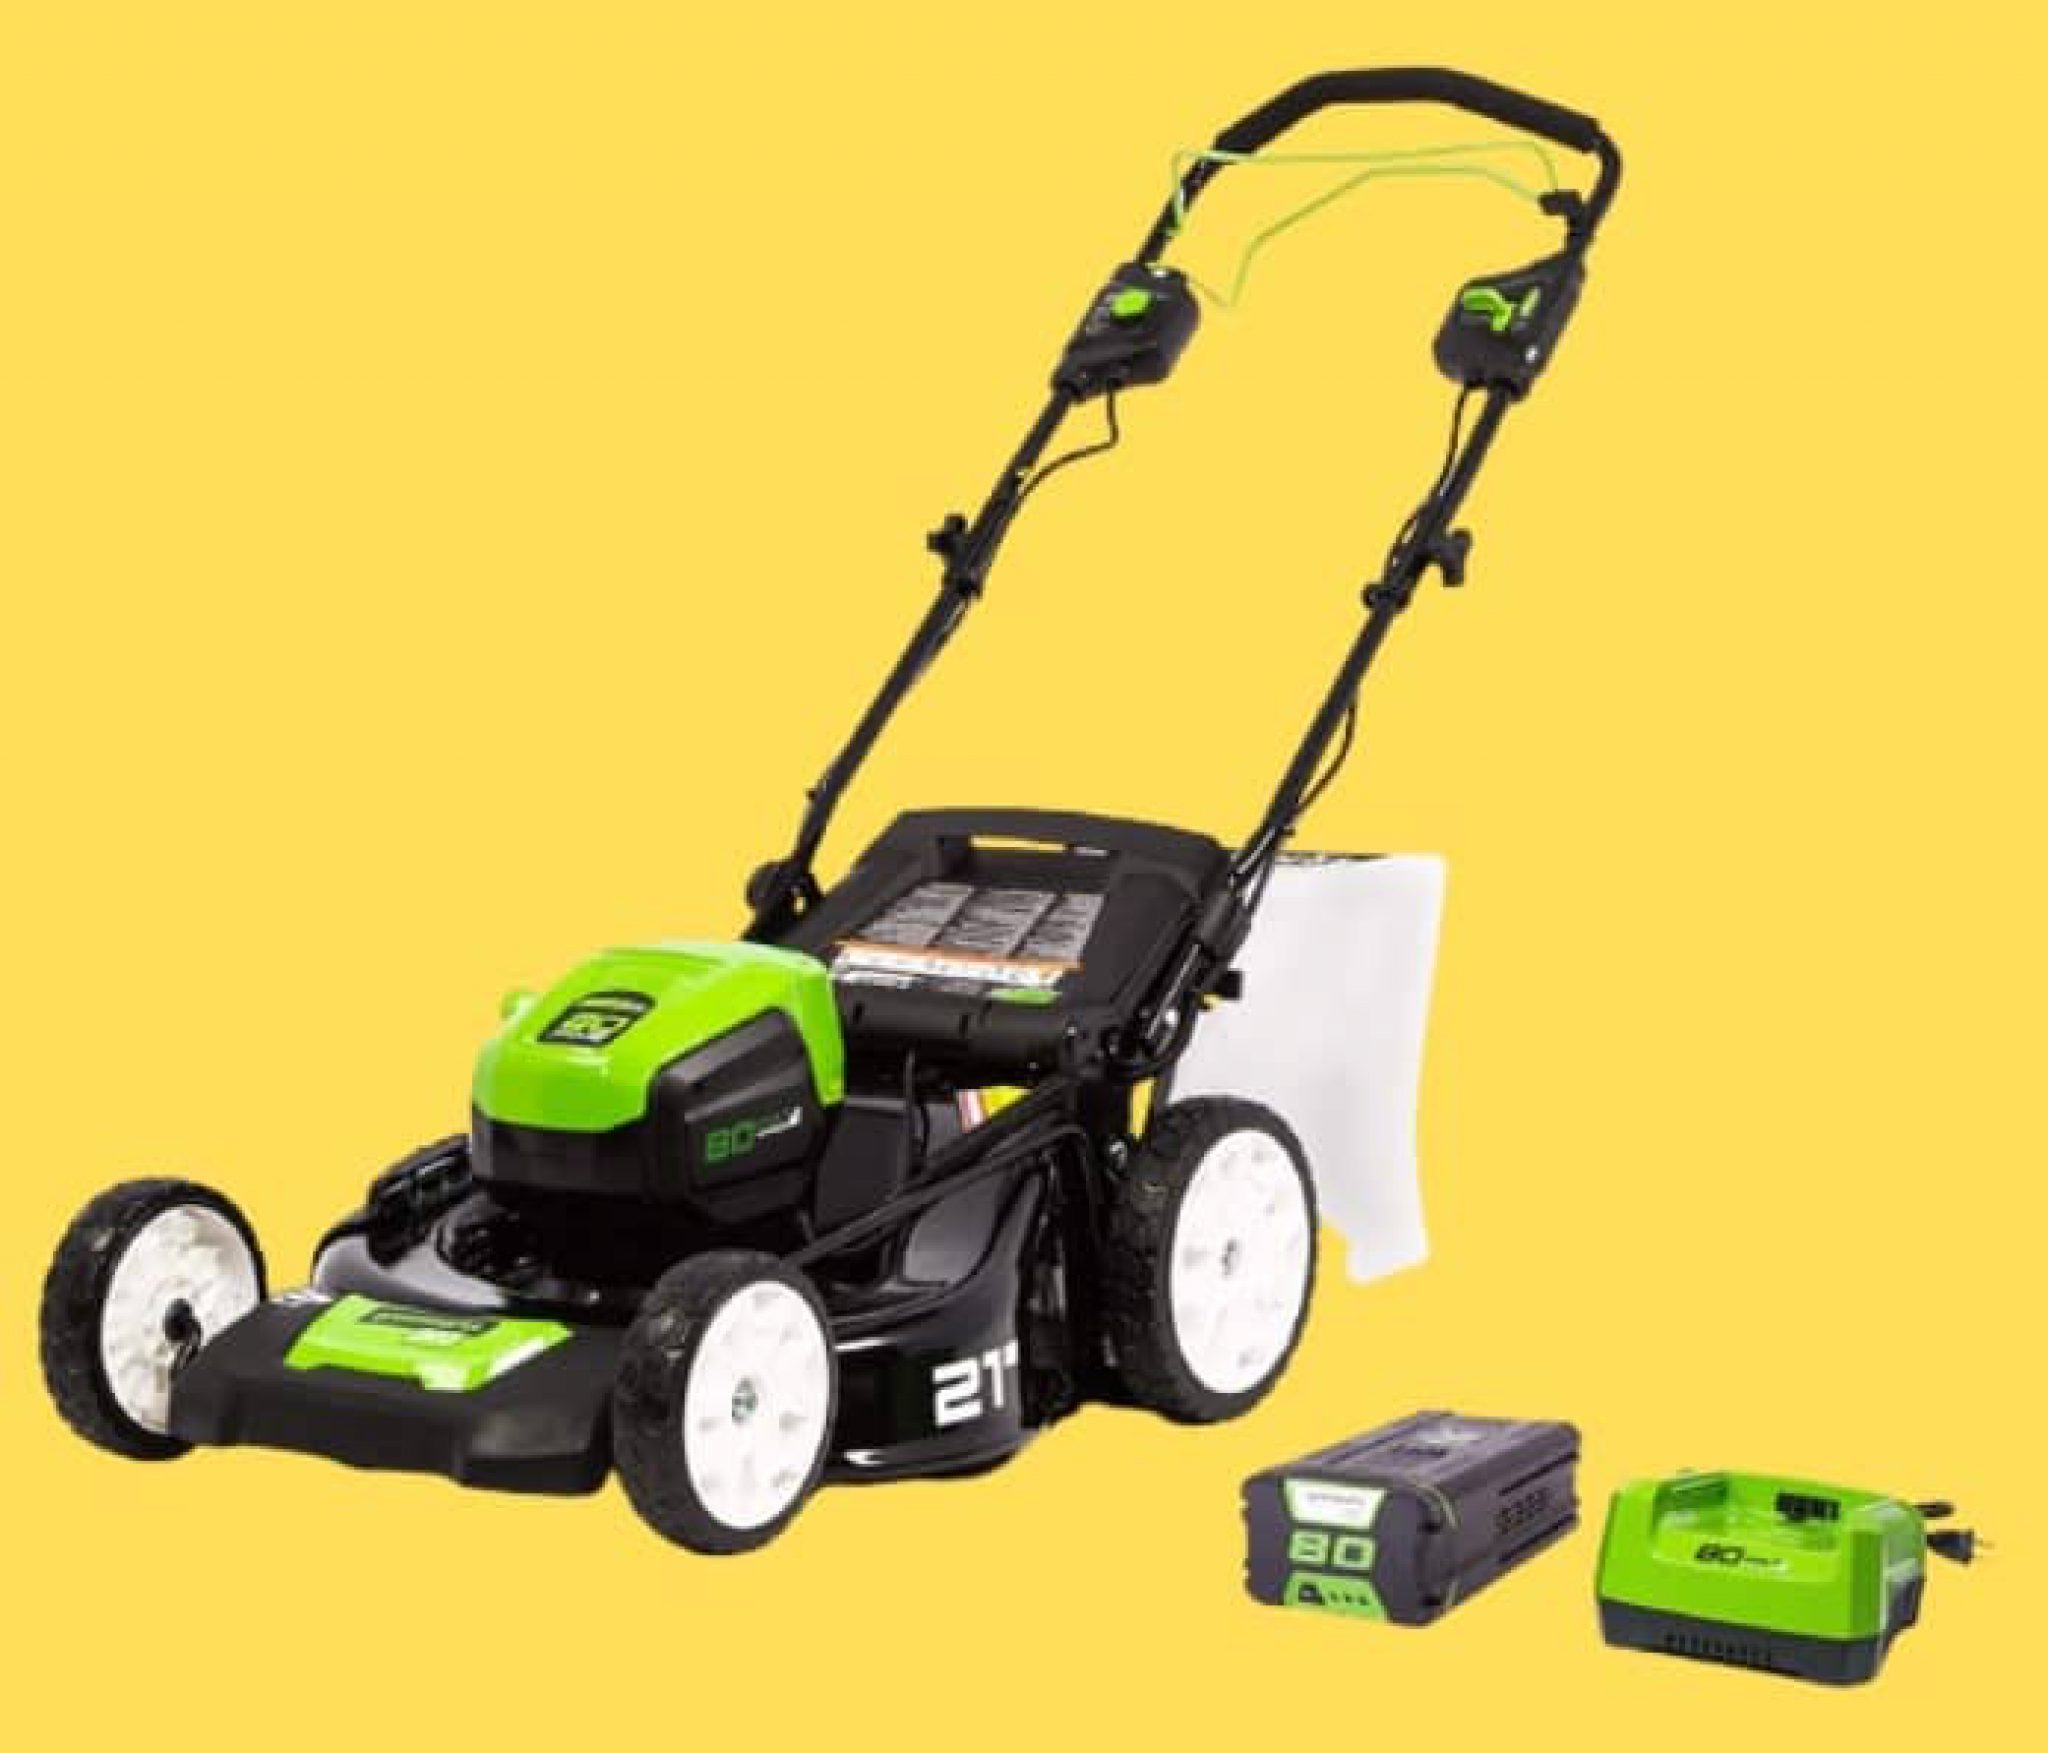 Best Electric Start Self Propelled Lawn Mower Hands On Review In Small To Mid Yard